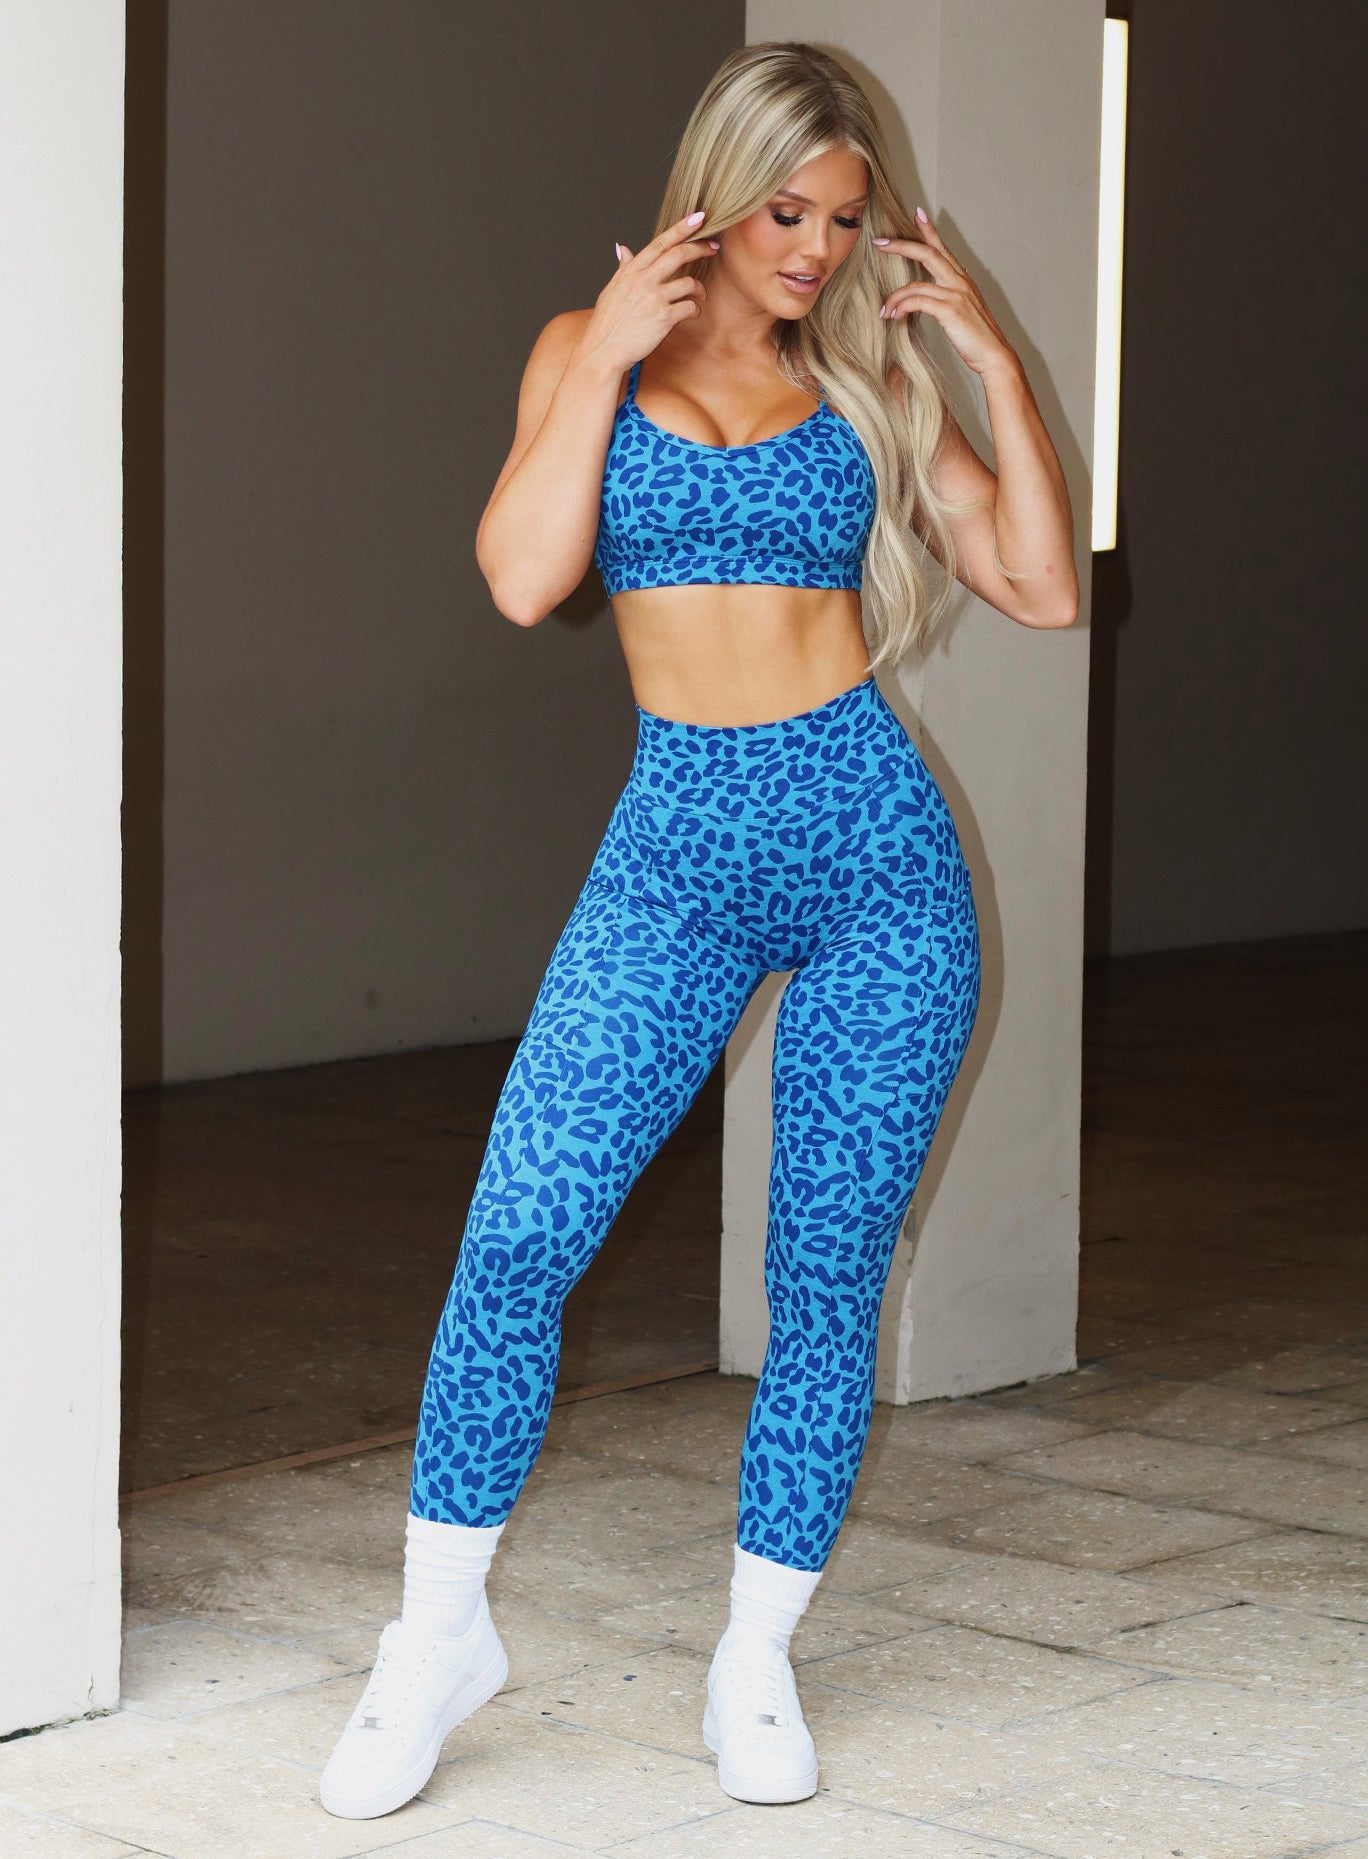 Front profile view of a model wearing our pumped sports bra in blue cheetah color and matching bombshell leggings